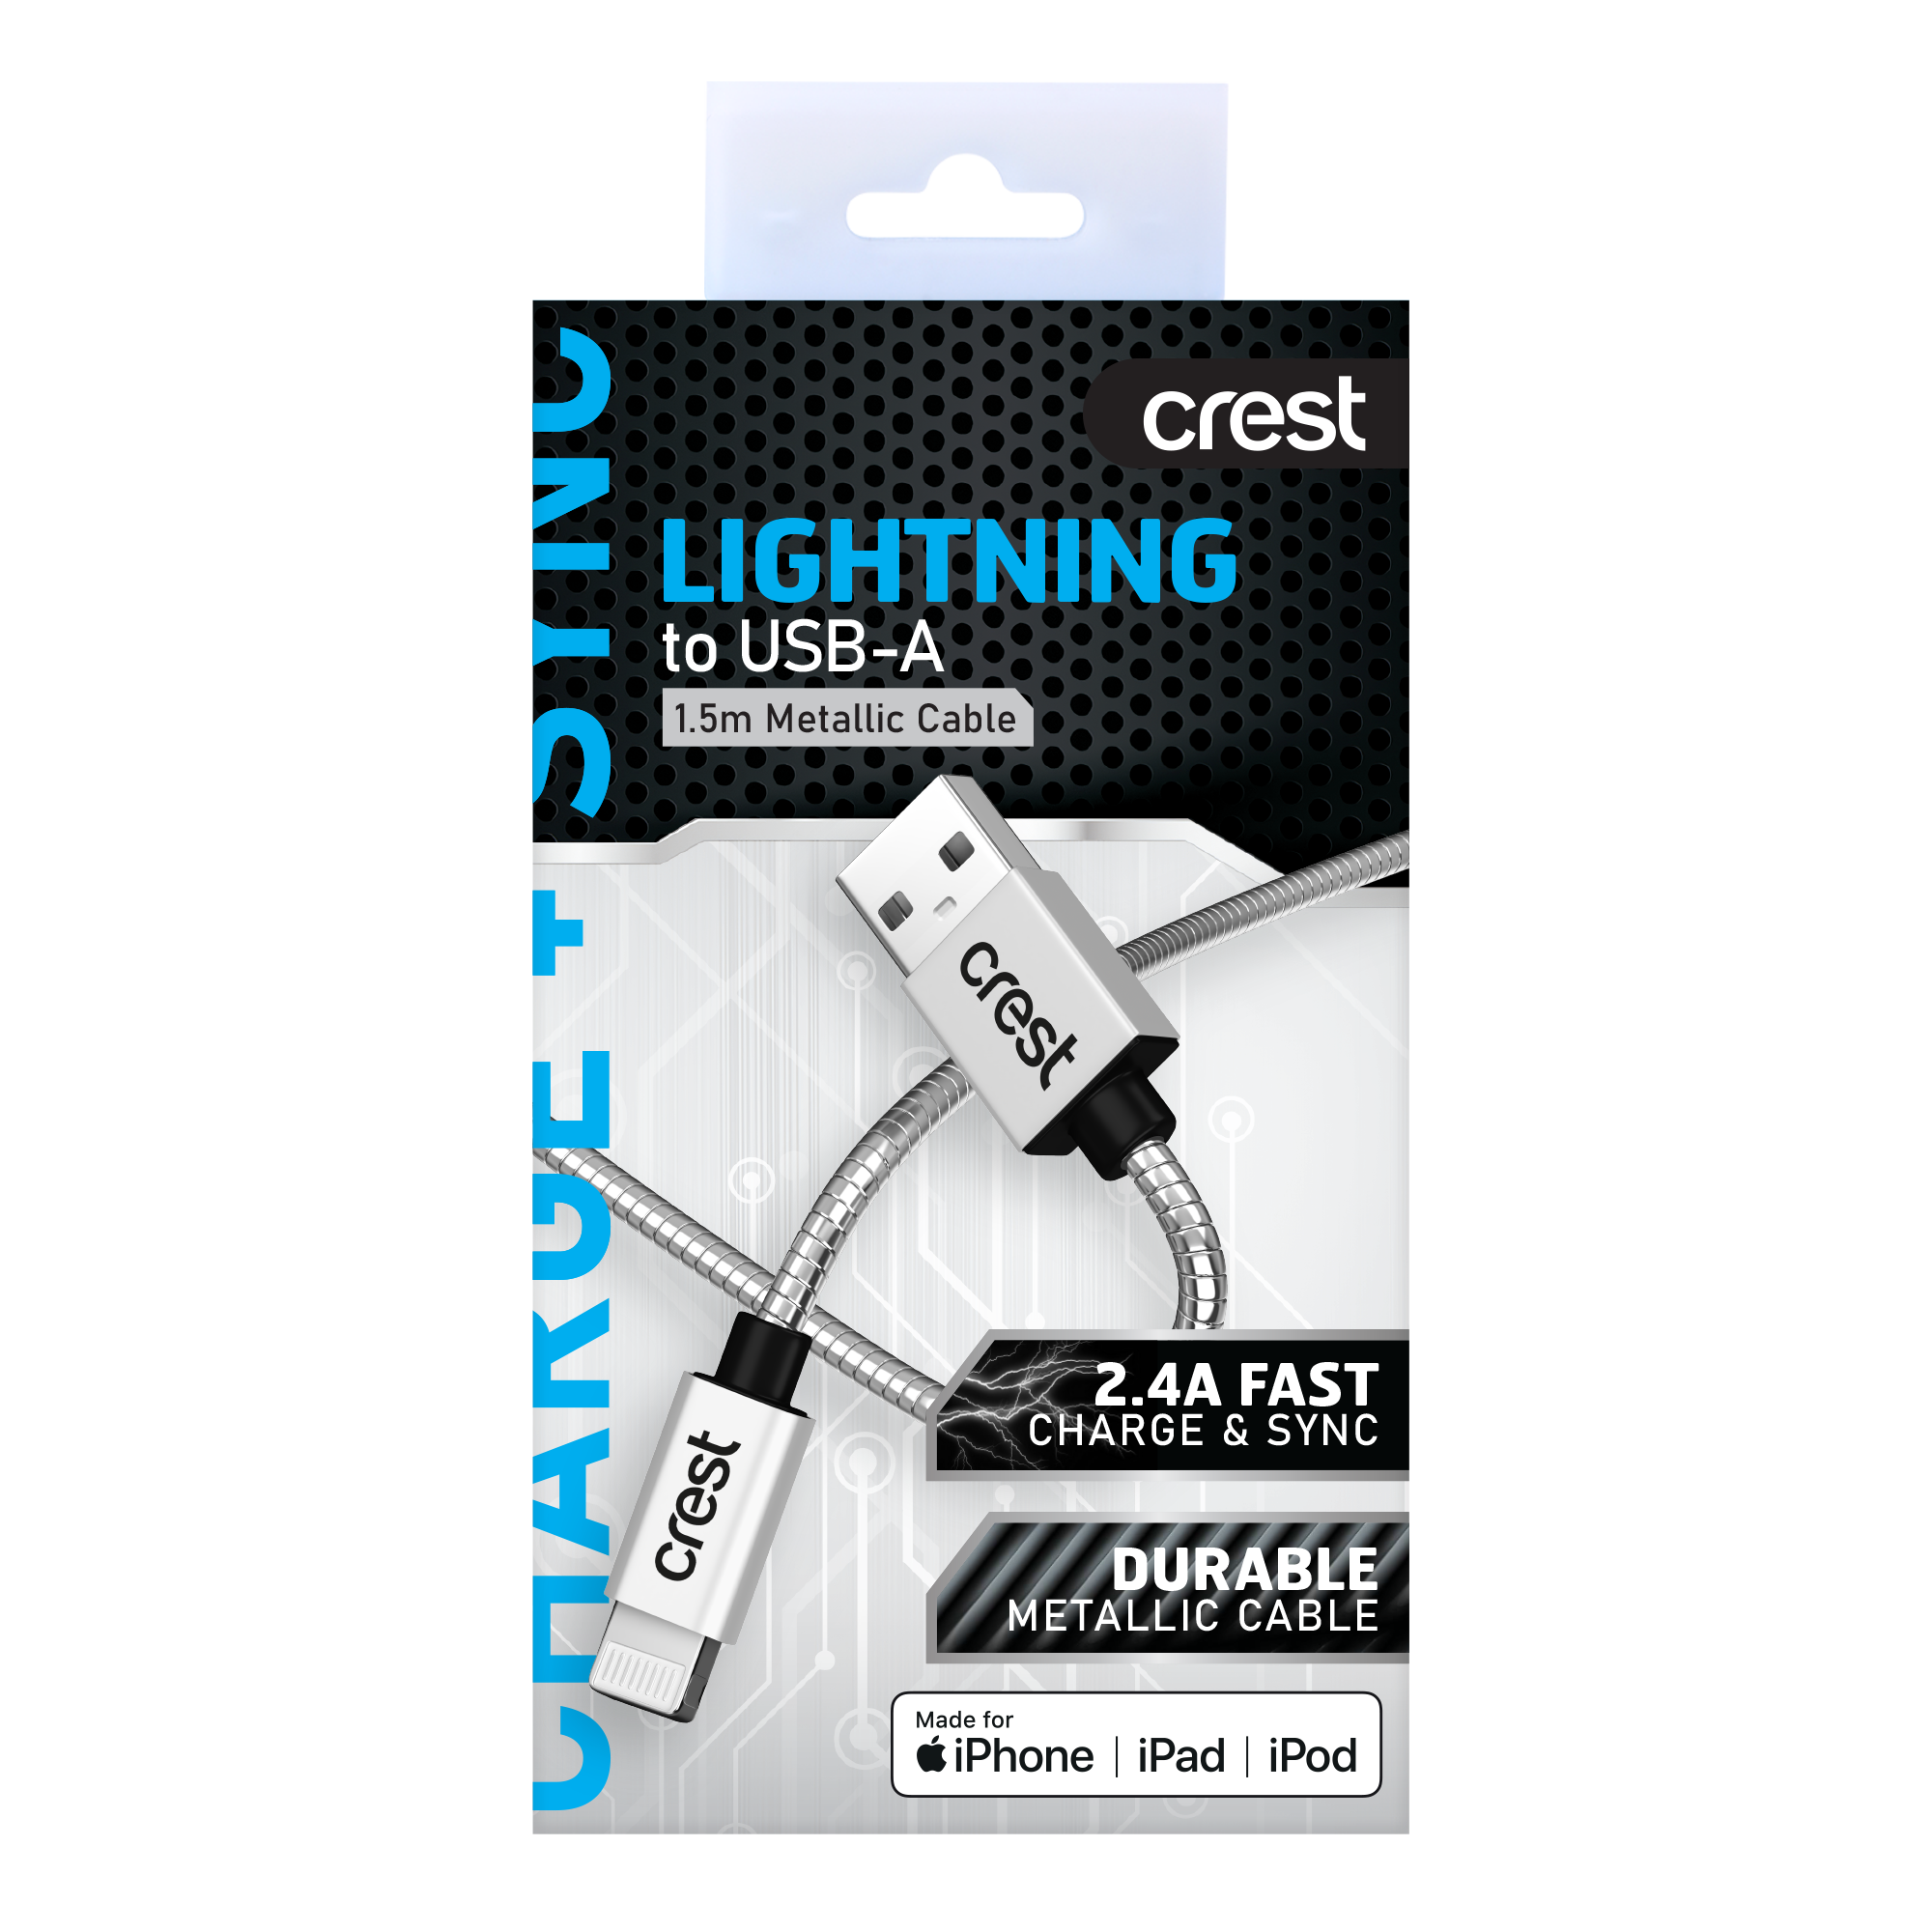 Lightning to USB-A Steel Cable 1.5M - Metallic